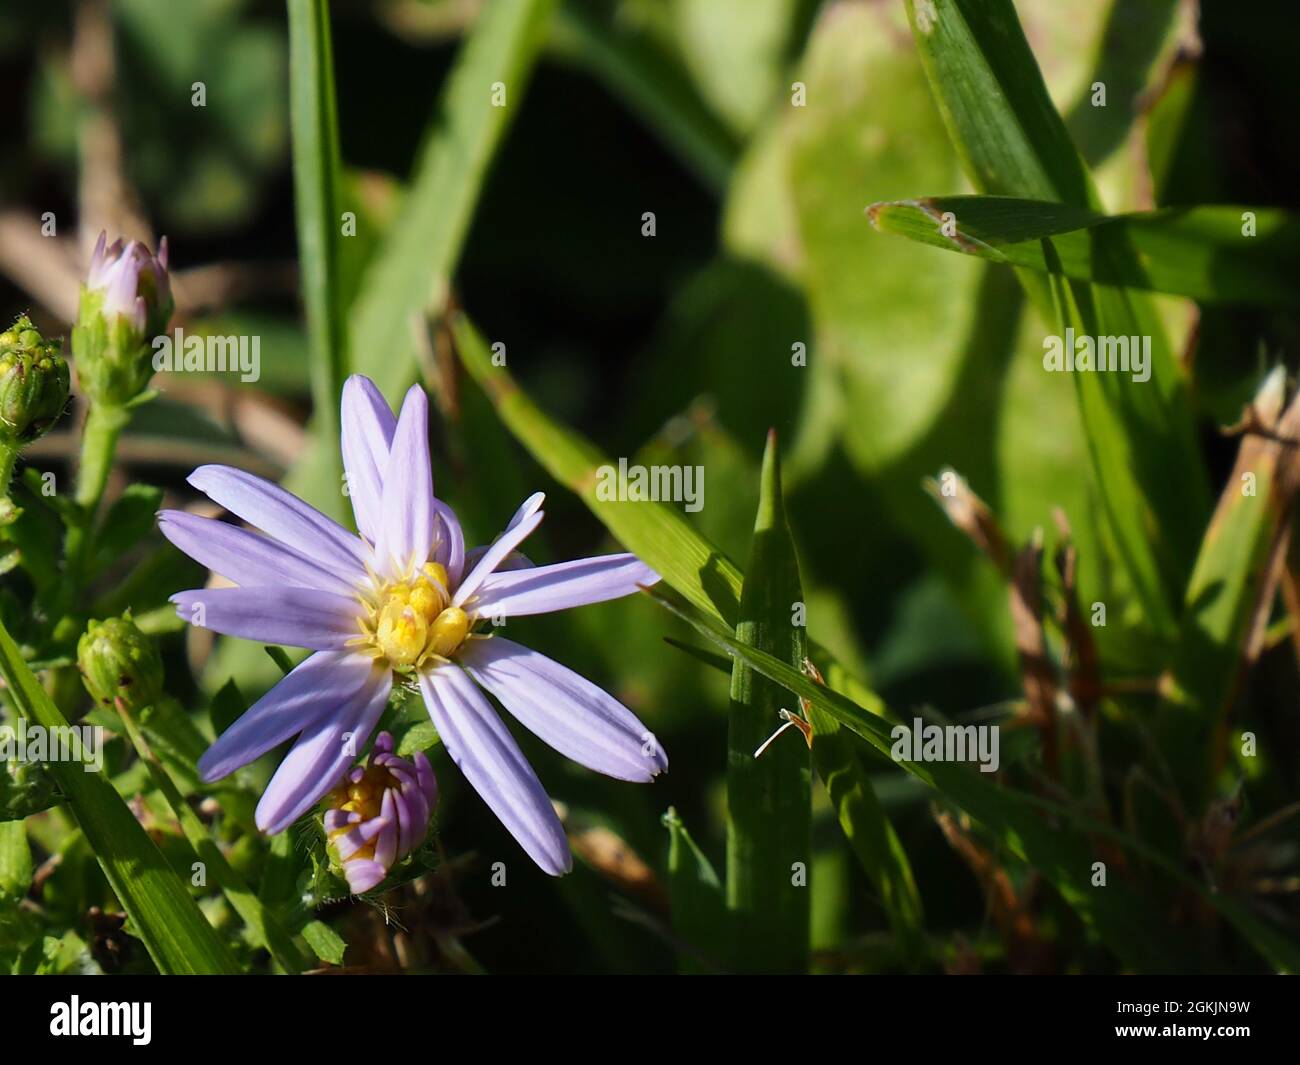 OLYMPUS DIGITAL CAMERA - Close-up of the purple flower on a smooth aster plant growing in a meadow with a blurred background. Stock Photo